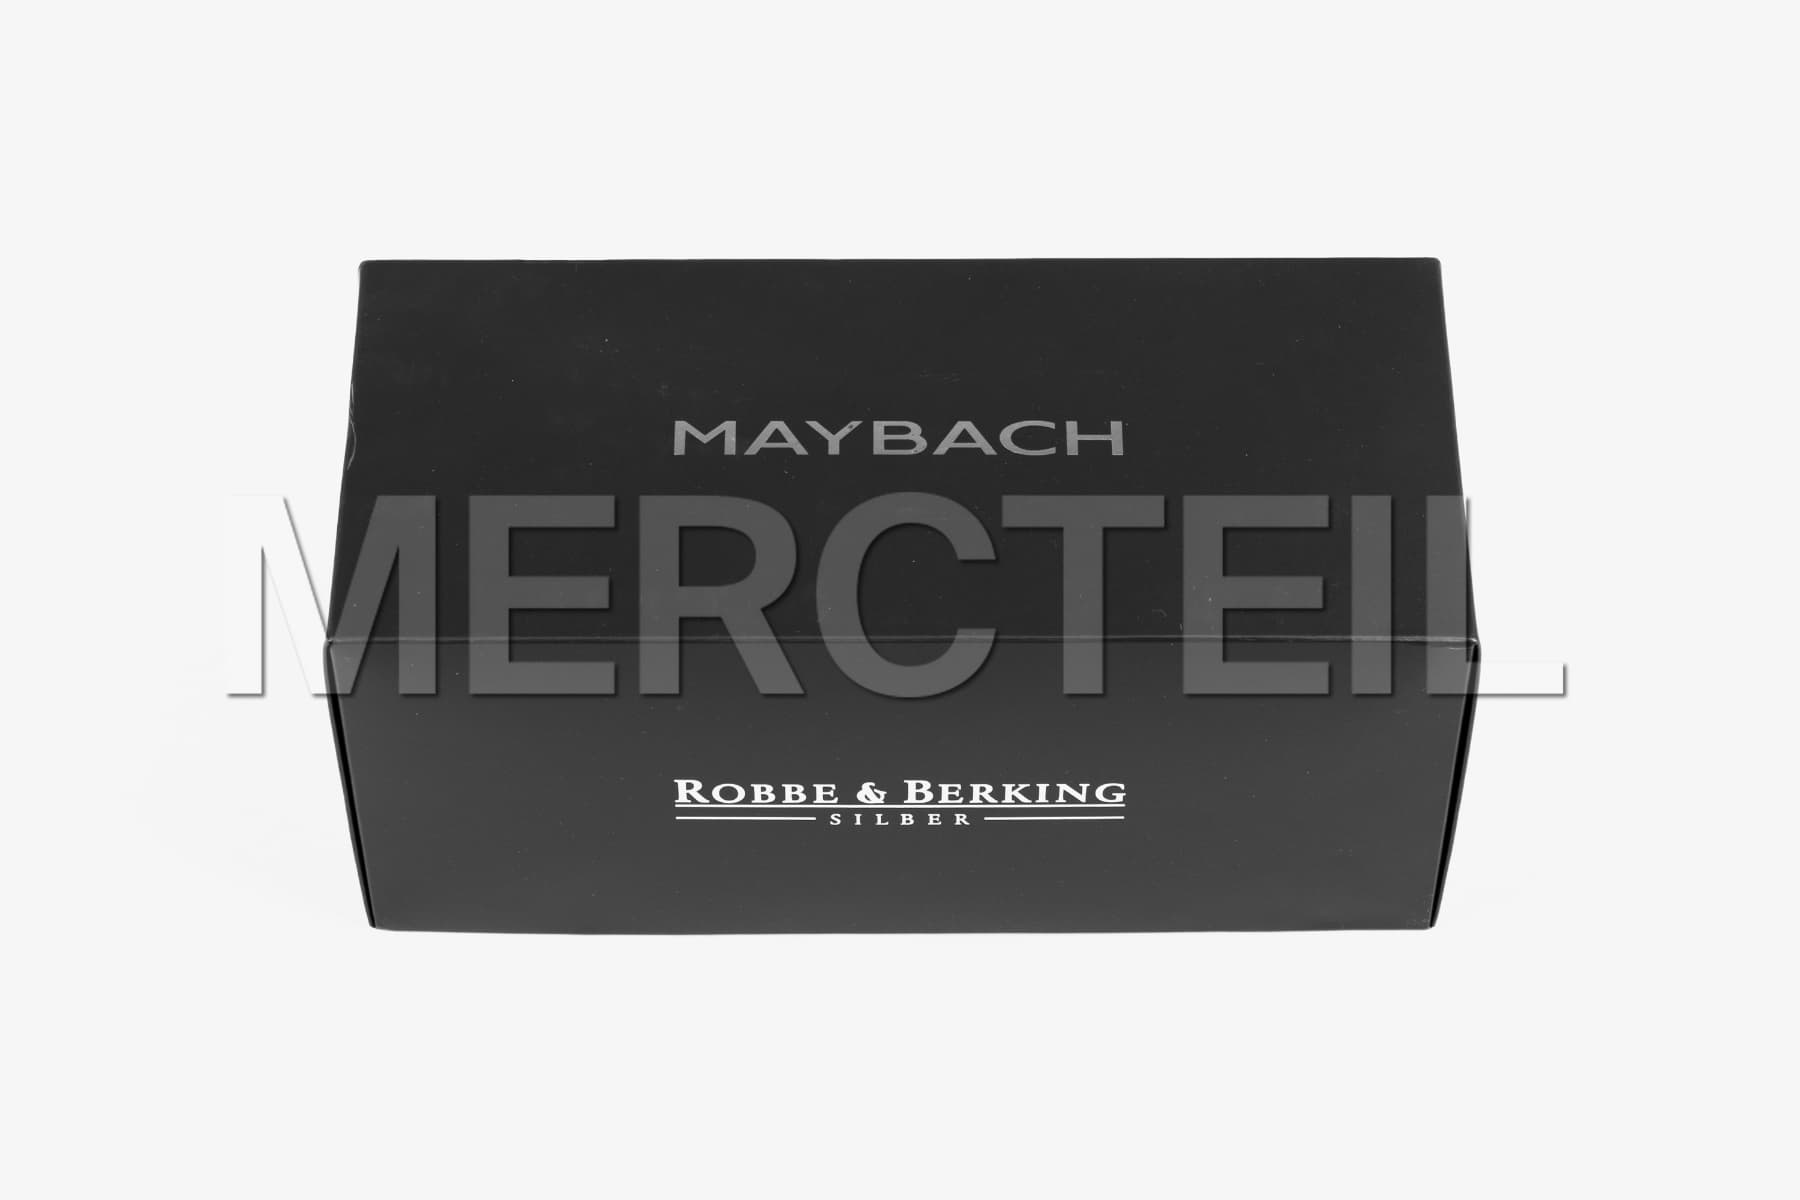 Maybach Champagne Flute Solid Silver Plated Genuine Mercedes-Benz (Part number: A2228430000)